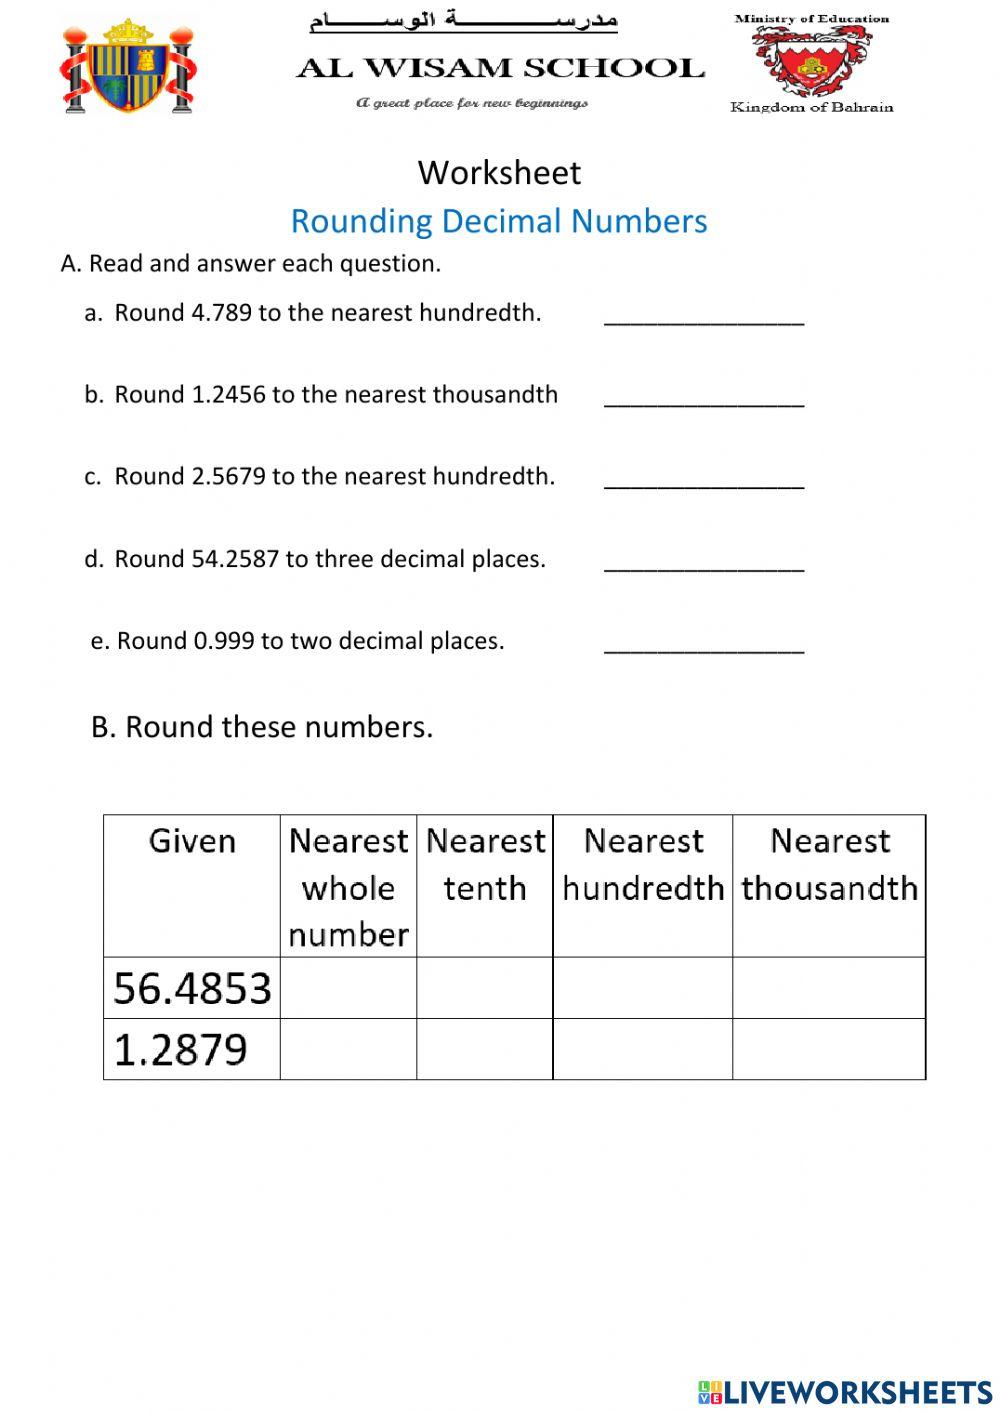 Rounding Decimal Numbers Nearest Hundredth and Thousandth